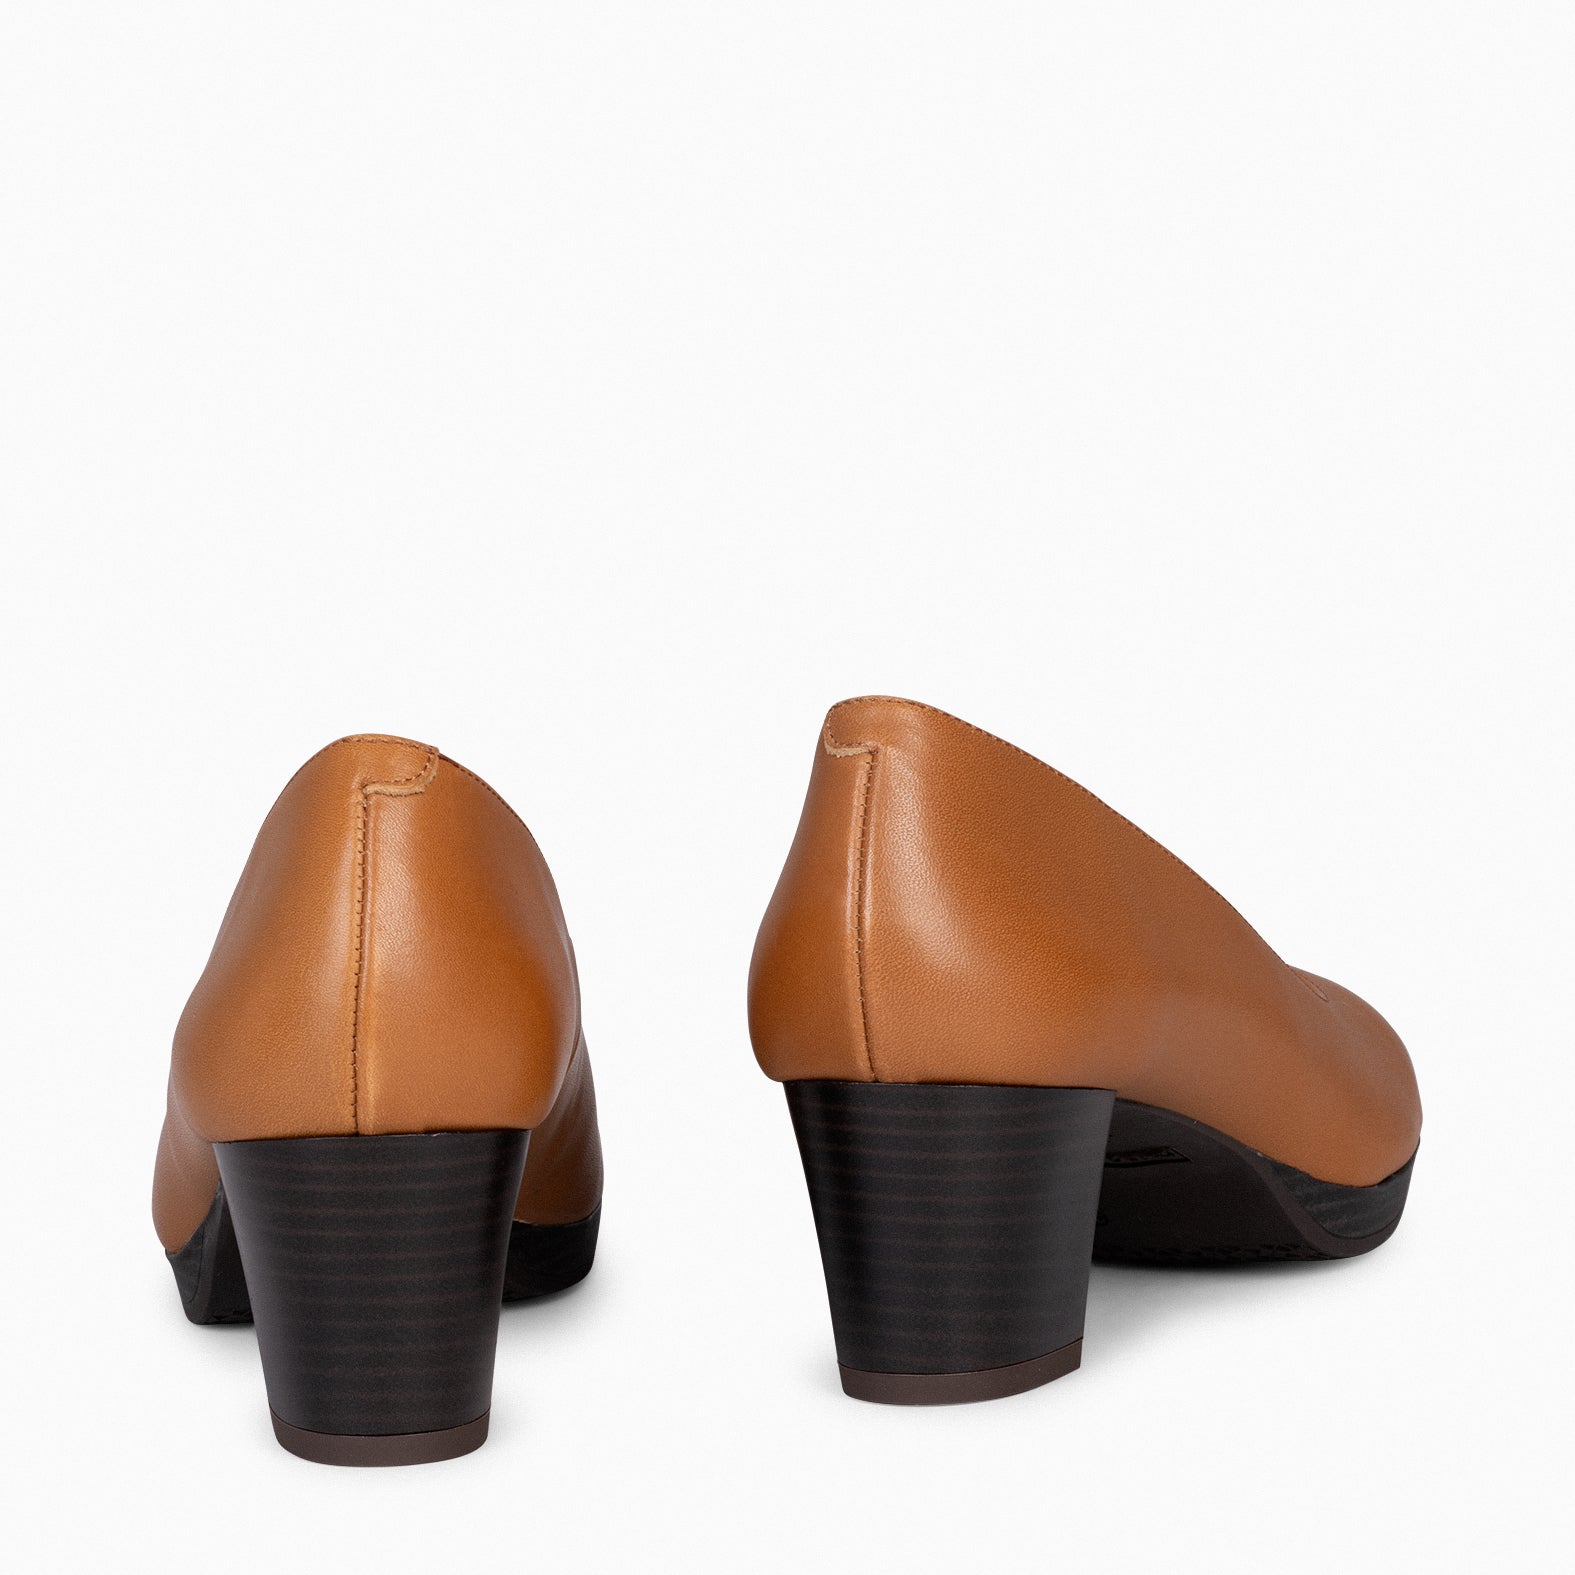 FLIGHT S - CAMEL shoes with heel and platform 